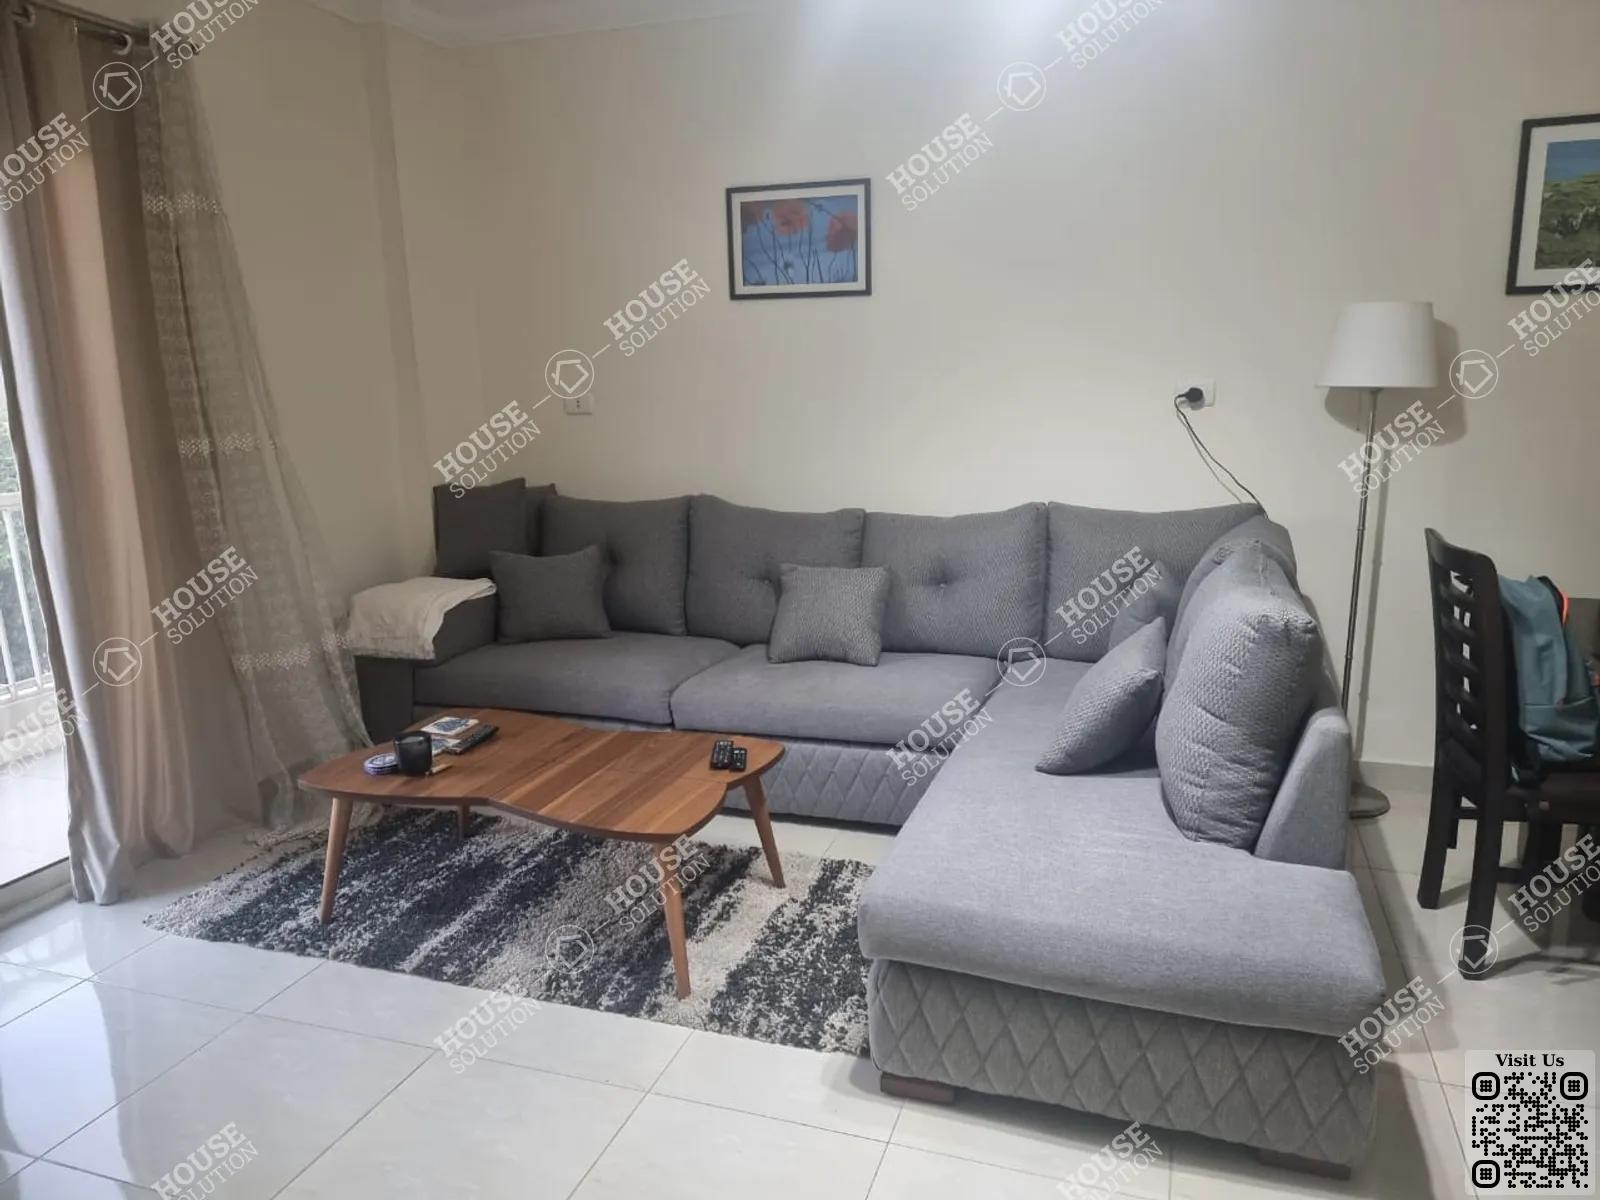 RECEPTION  @ Apartments For Rent In Maadi Maadi Degla Area: 150 m² consists of 2 Bedrooms 2 Bathrooms Modern furnished 5 stars #5612-0